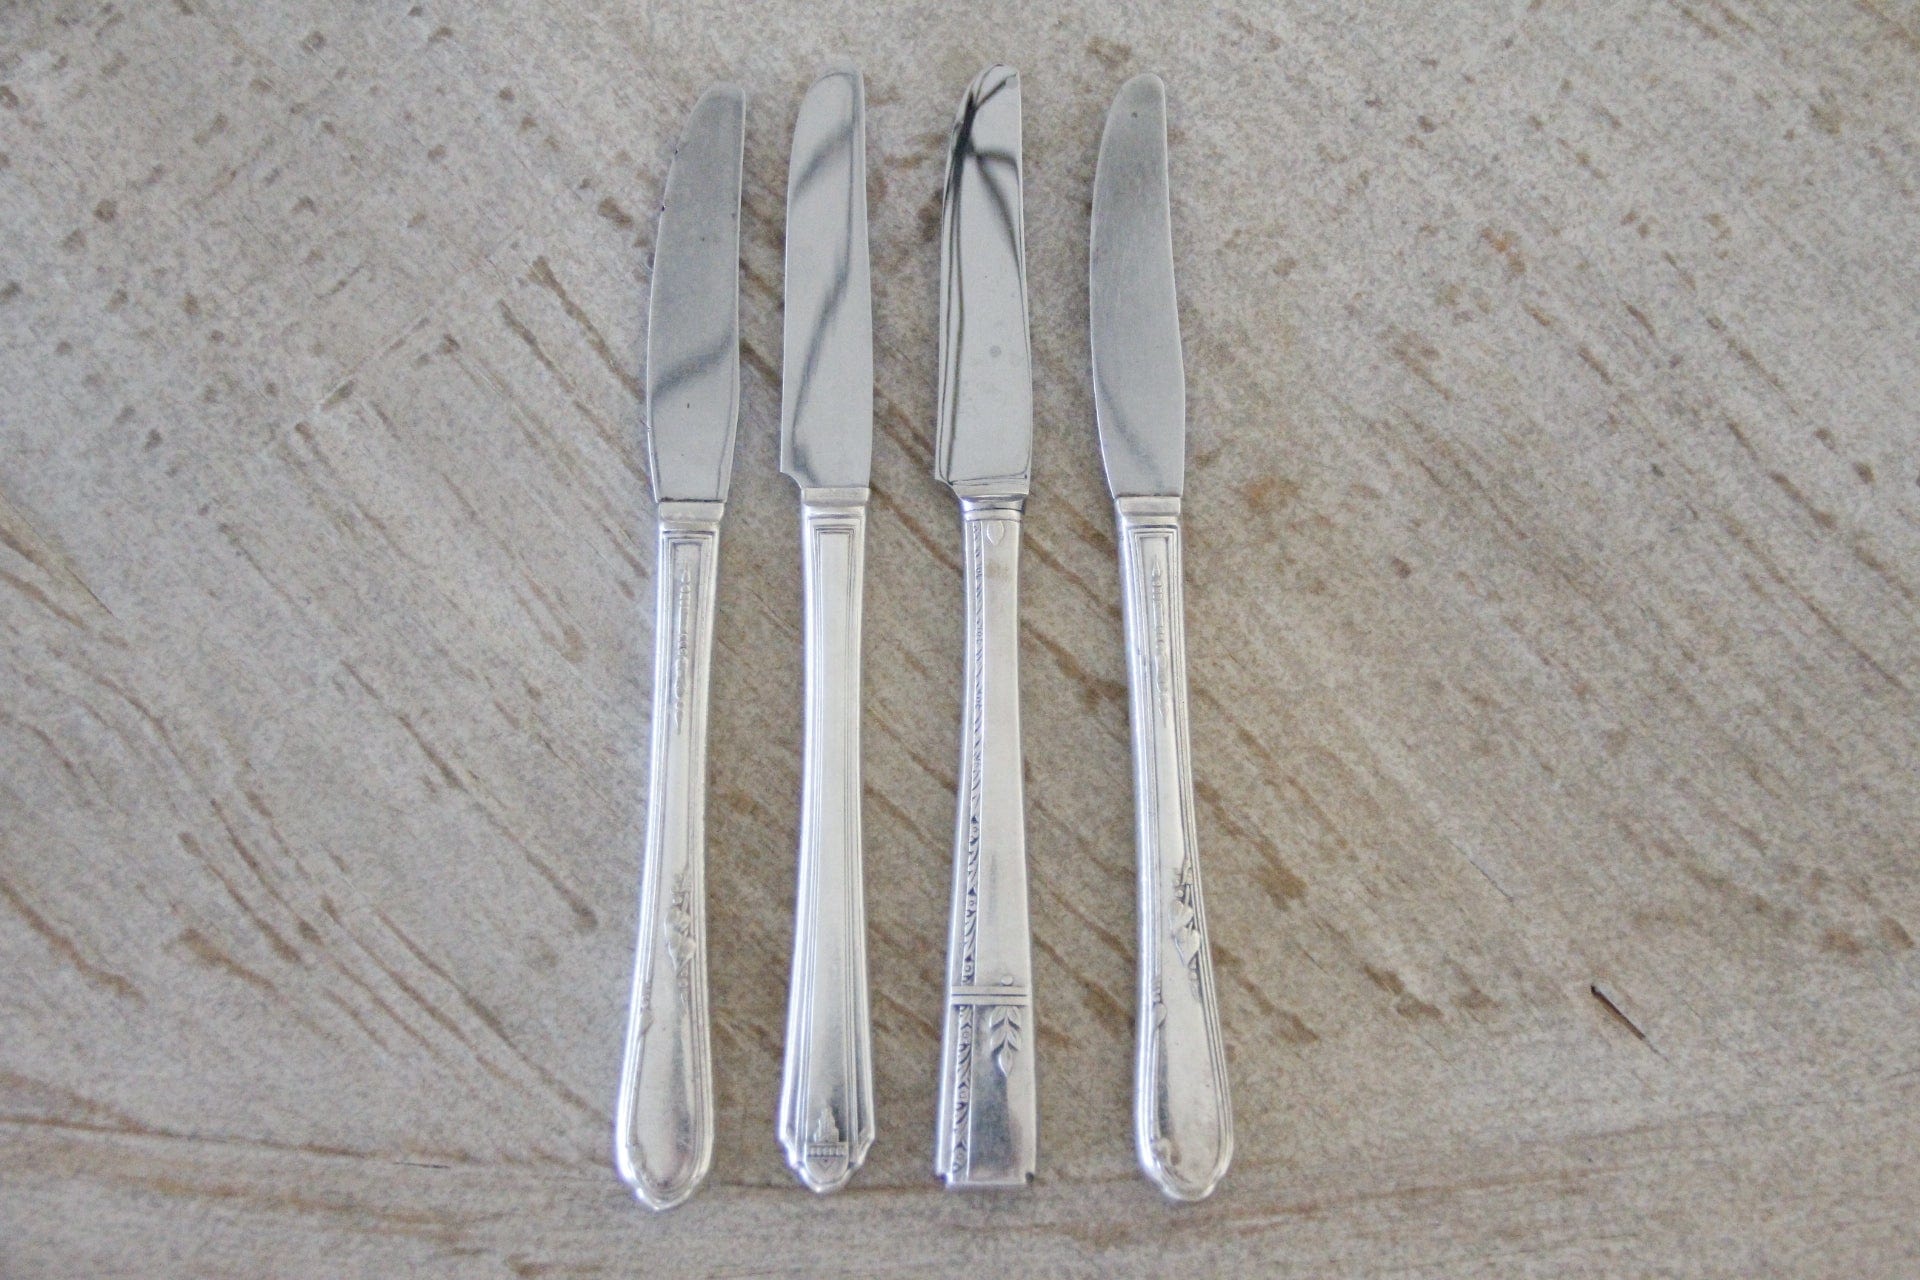 Antique Silver Grille Knife | Flatware 4 Mixed Pcs. - Debra Hall Lifestyle